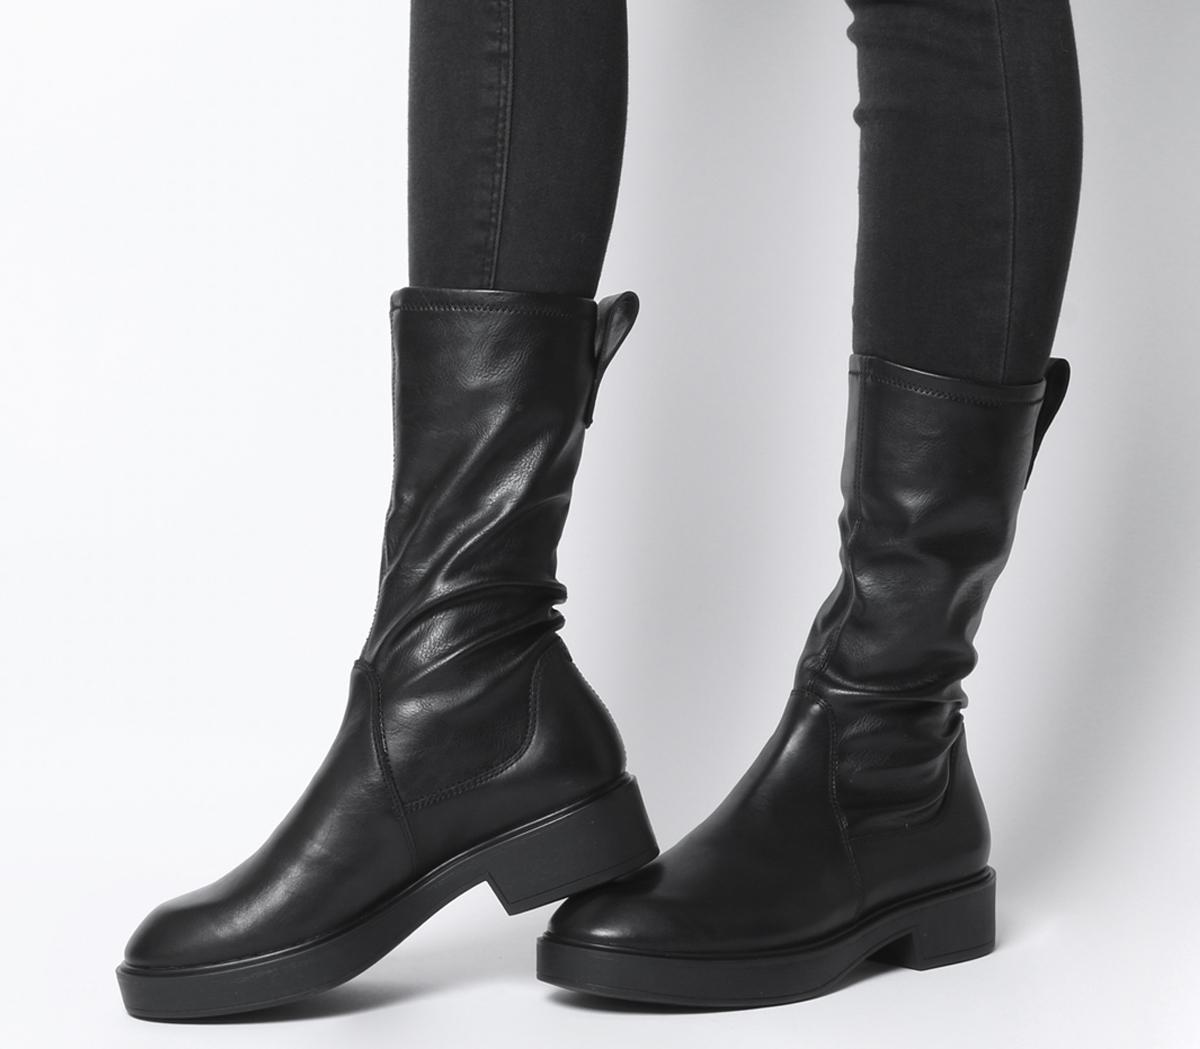 Vagabond Diane High Boots Black Leather - Ankle Boots